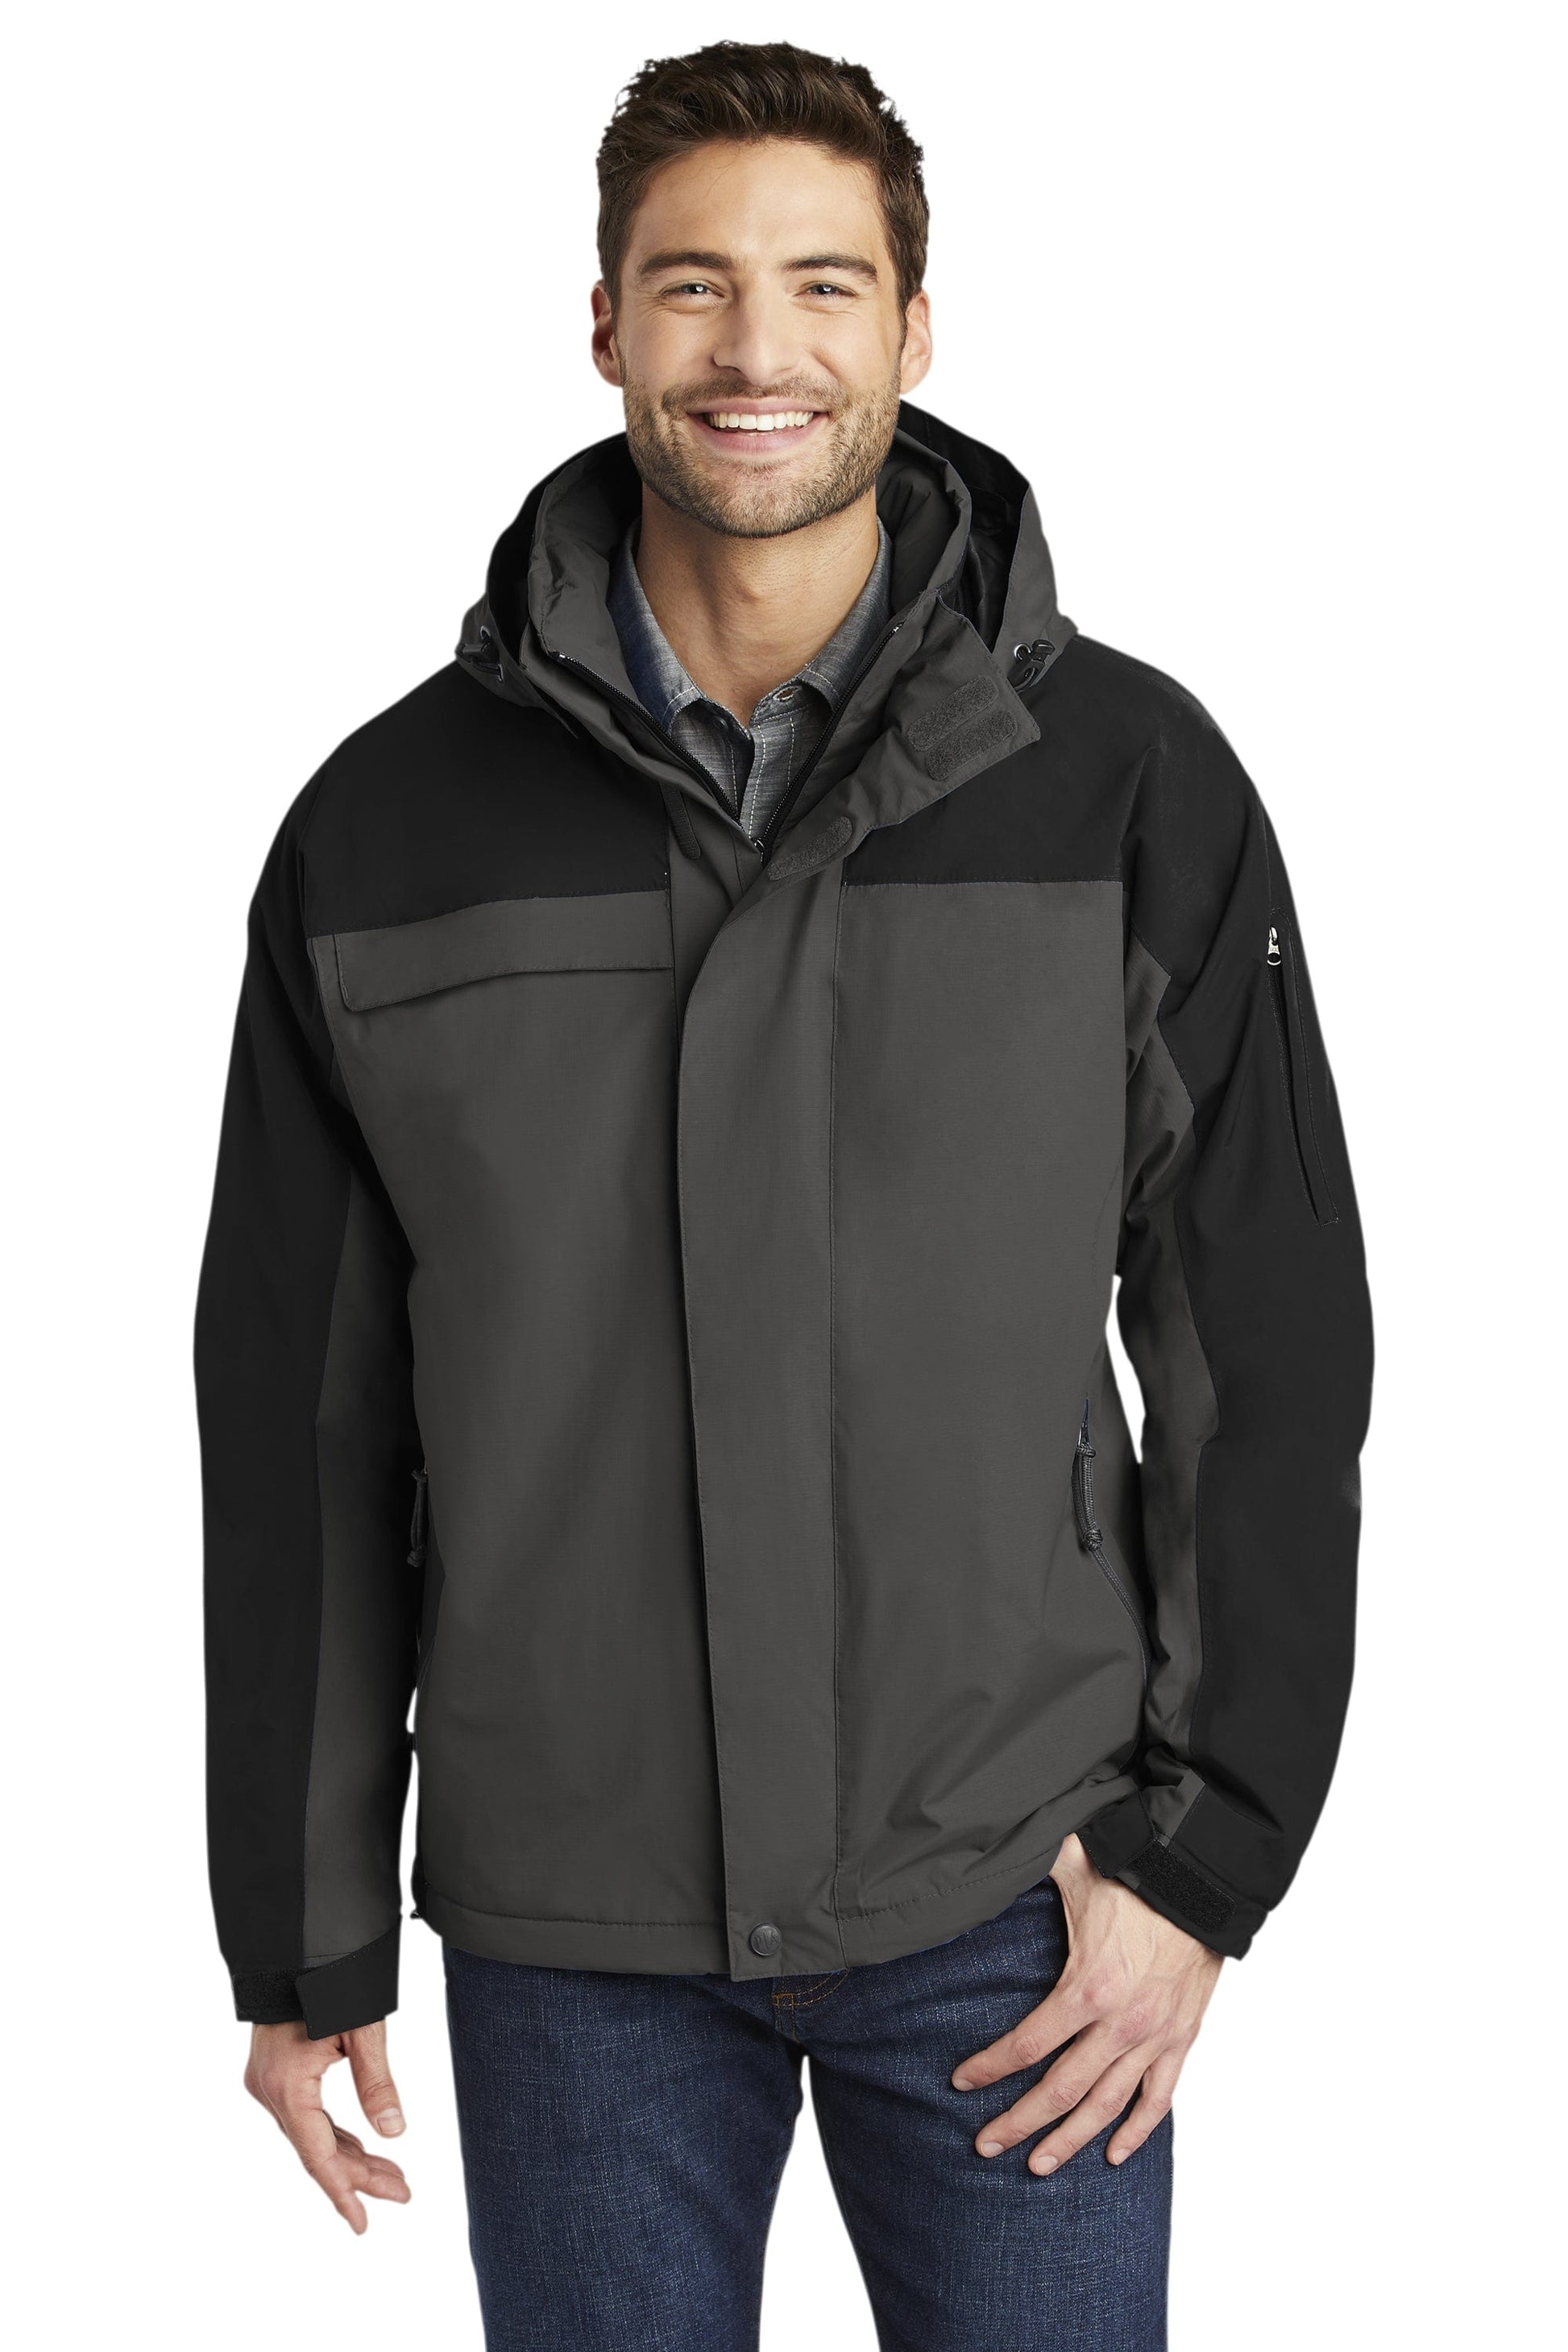 FORtheFIT mens-tall-jacket Waterproof Nootka Tall Men's Jacket - 2 Colors Available